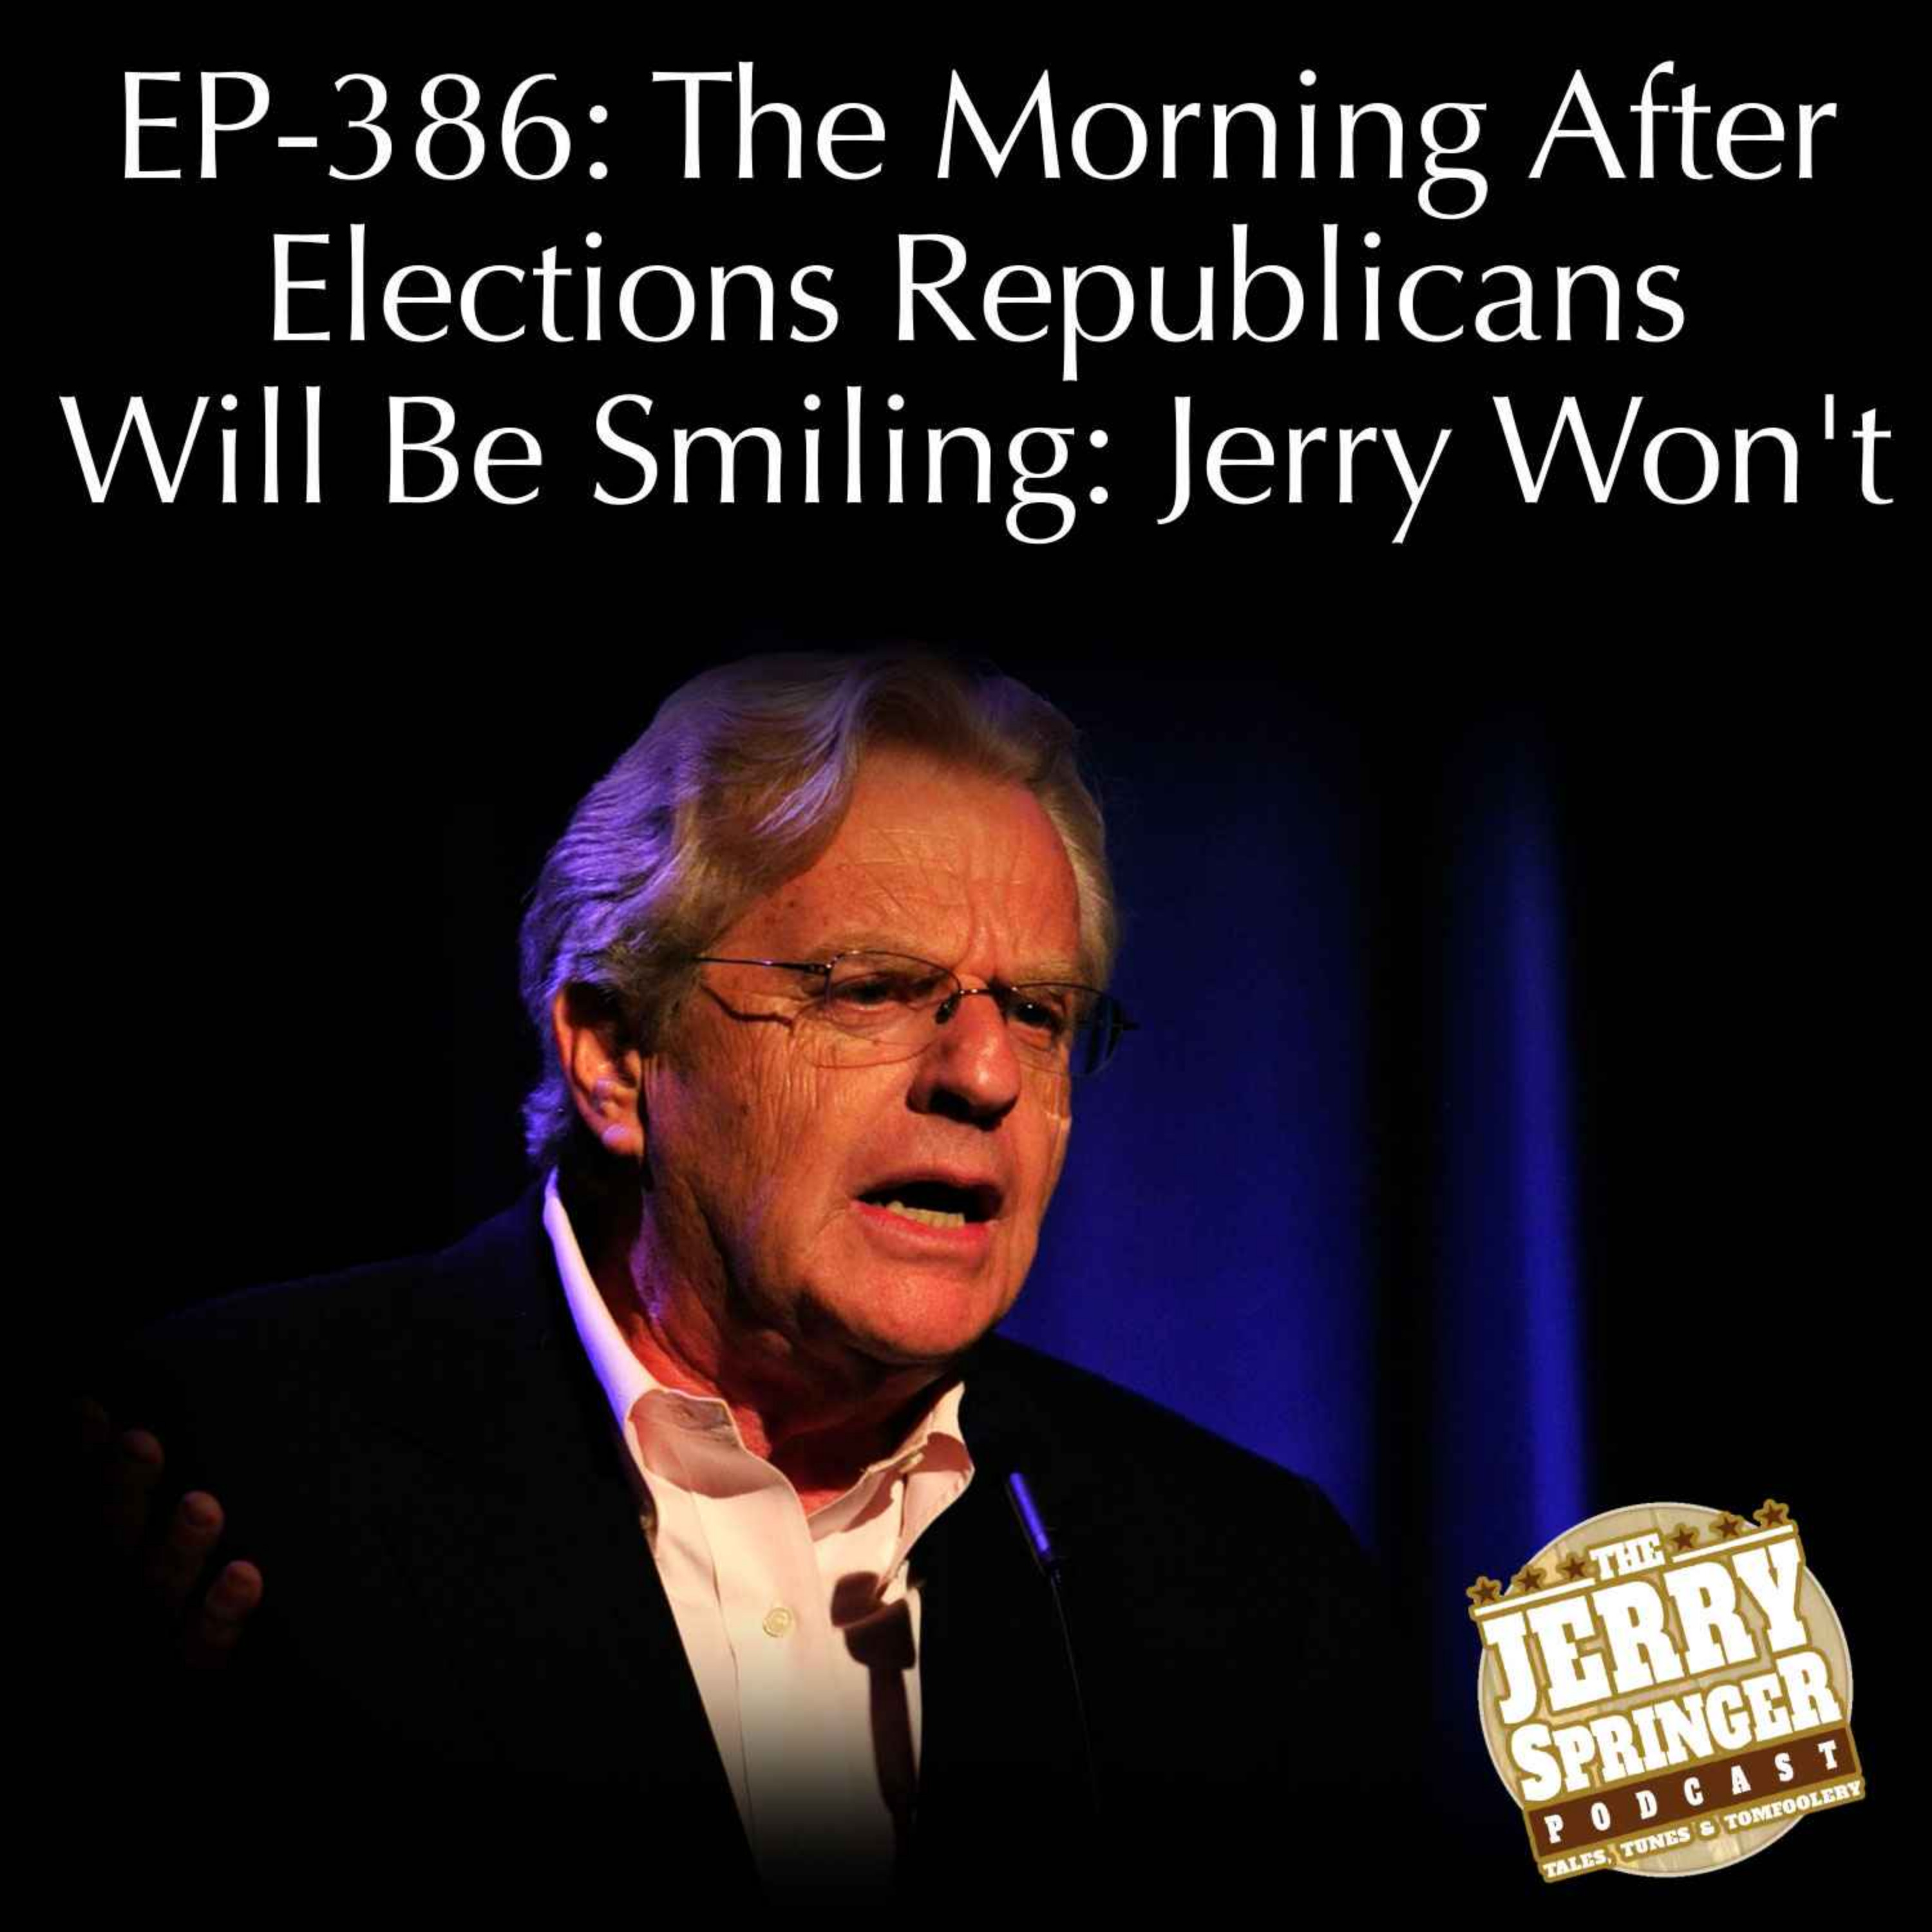 The Morning After Elections Republicans Will Be Smiling: Jerry Won’t: EP - 386